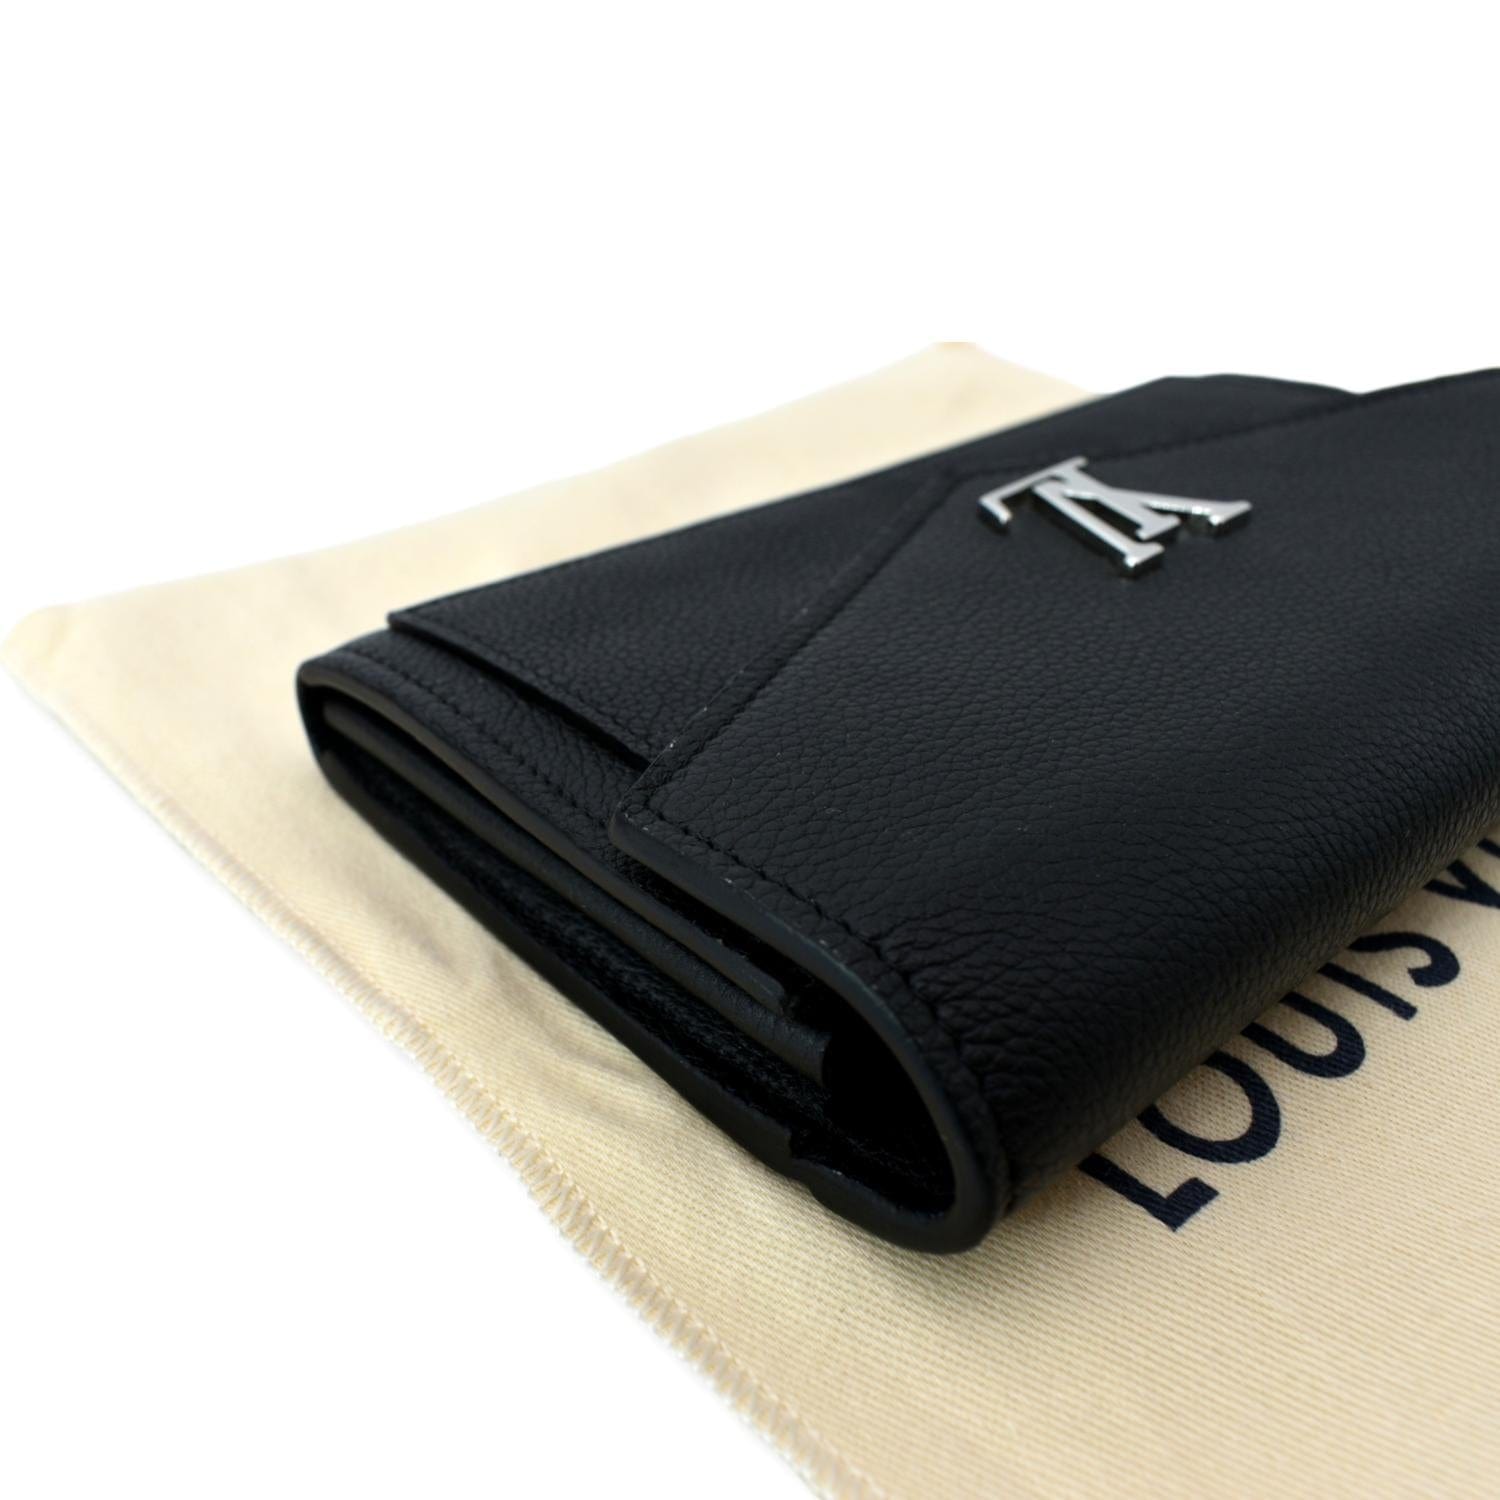 Lockmini Wallet Lockme Leather - Wallets and Small Leather Goods